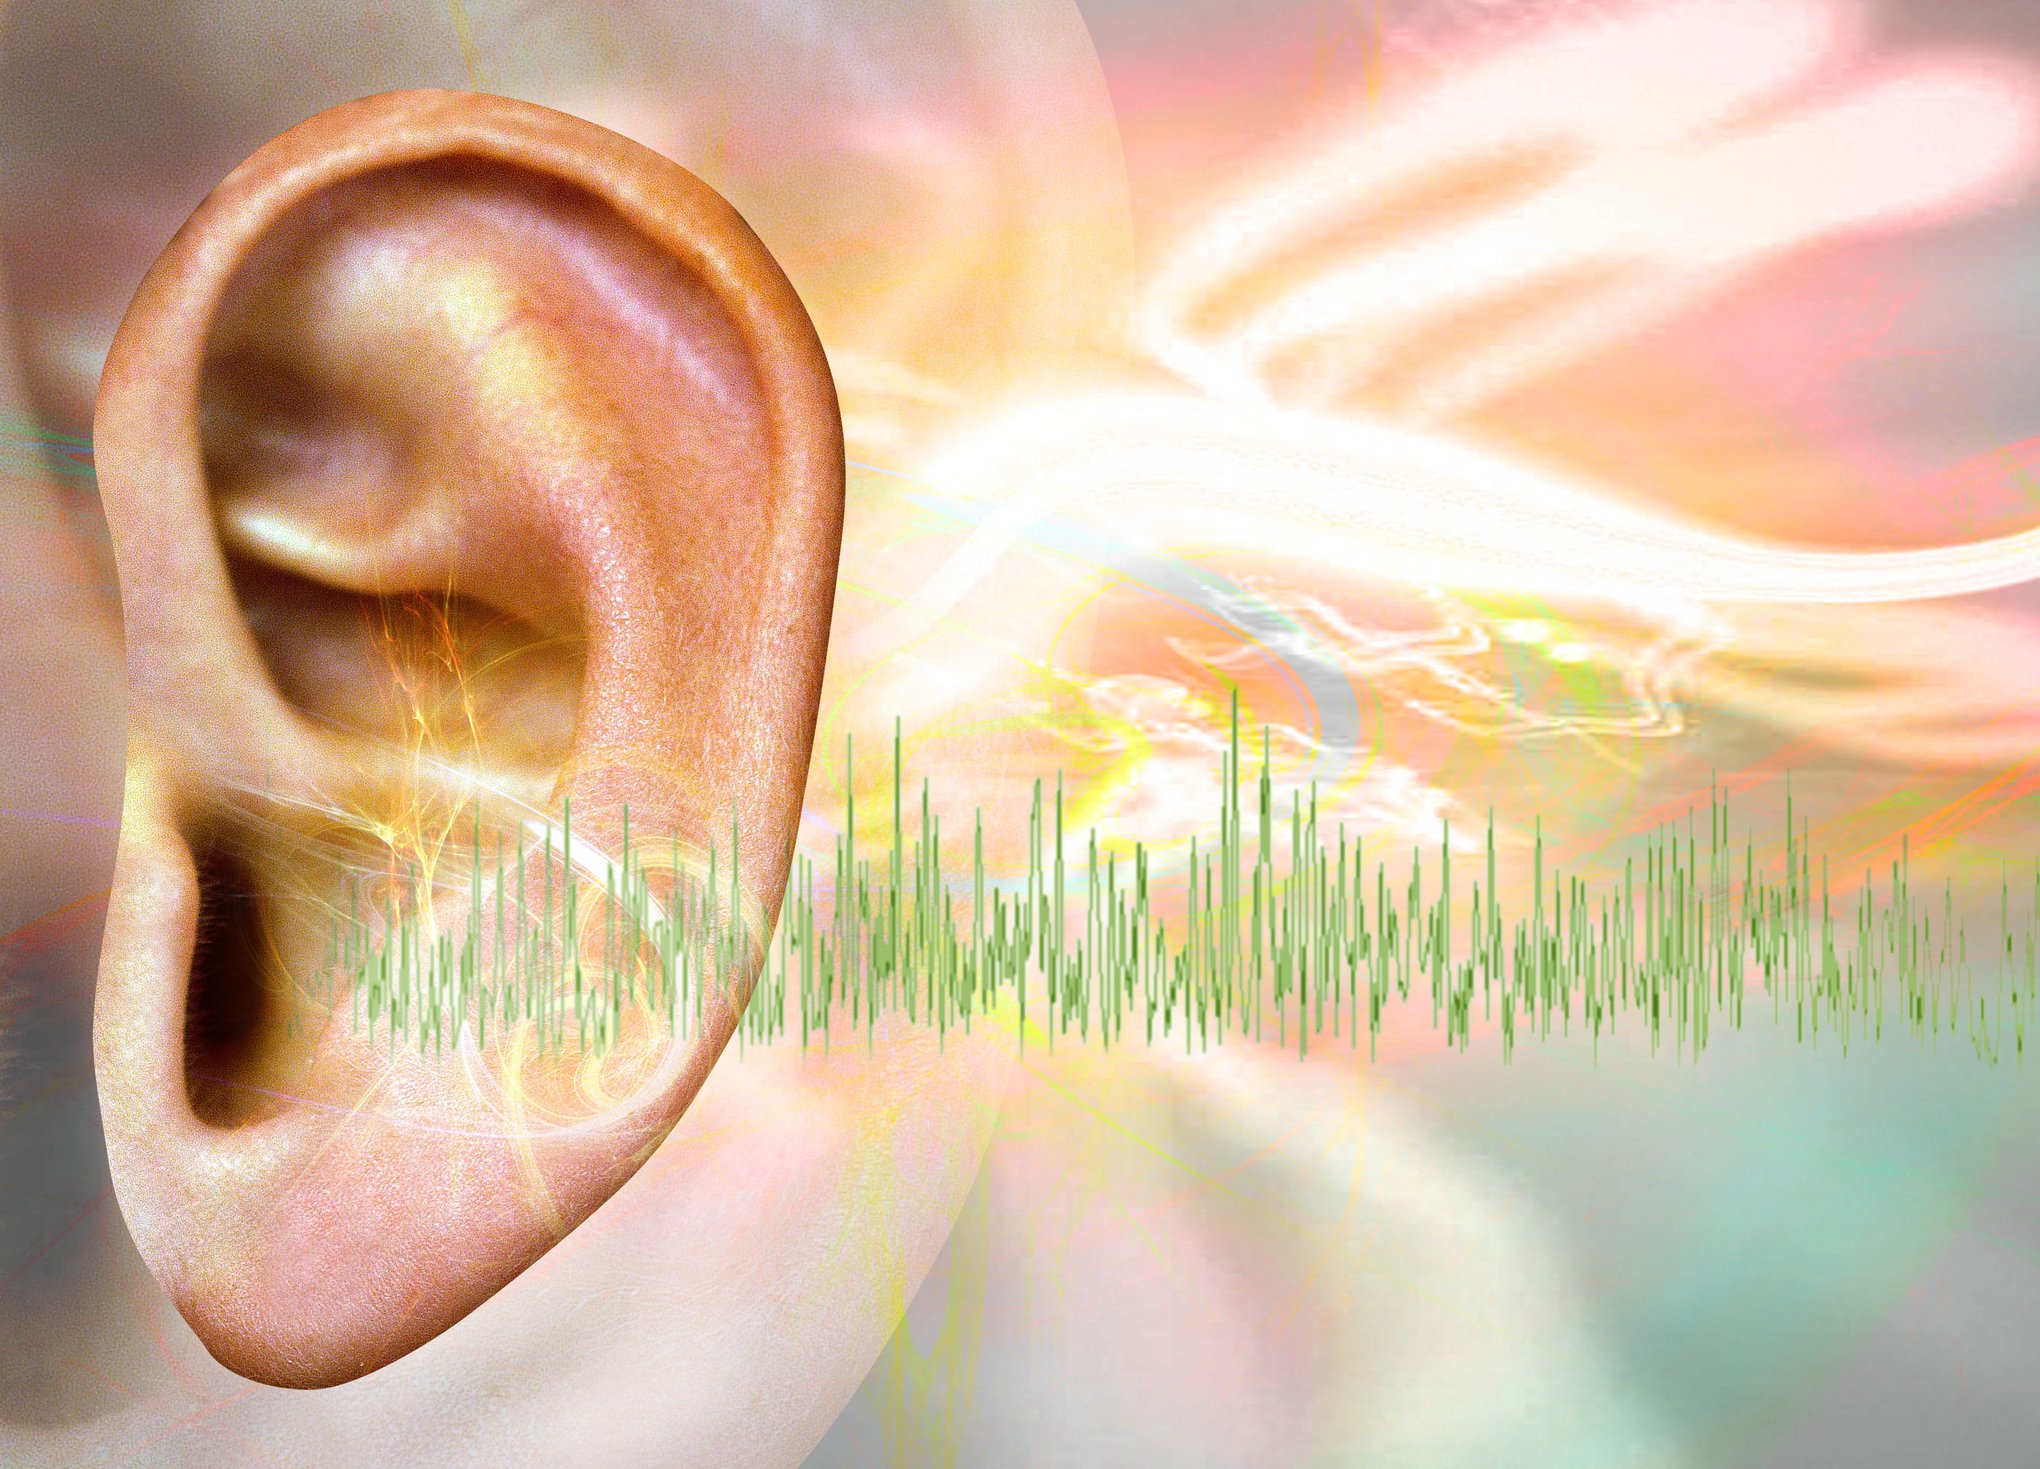 Tinnitus Explained  What is that Ringing in Ears?